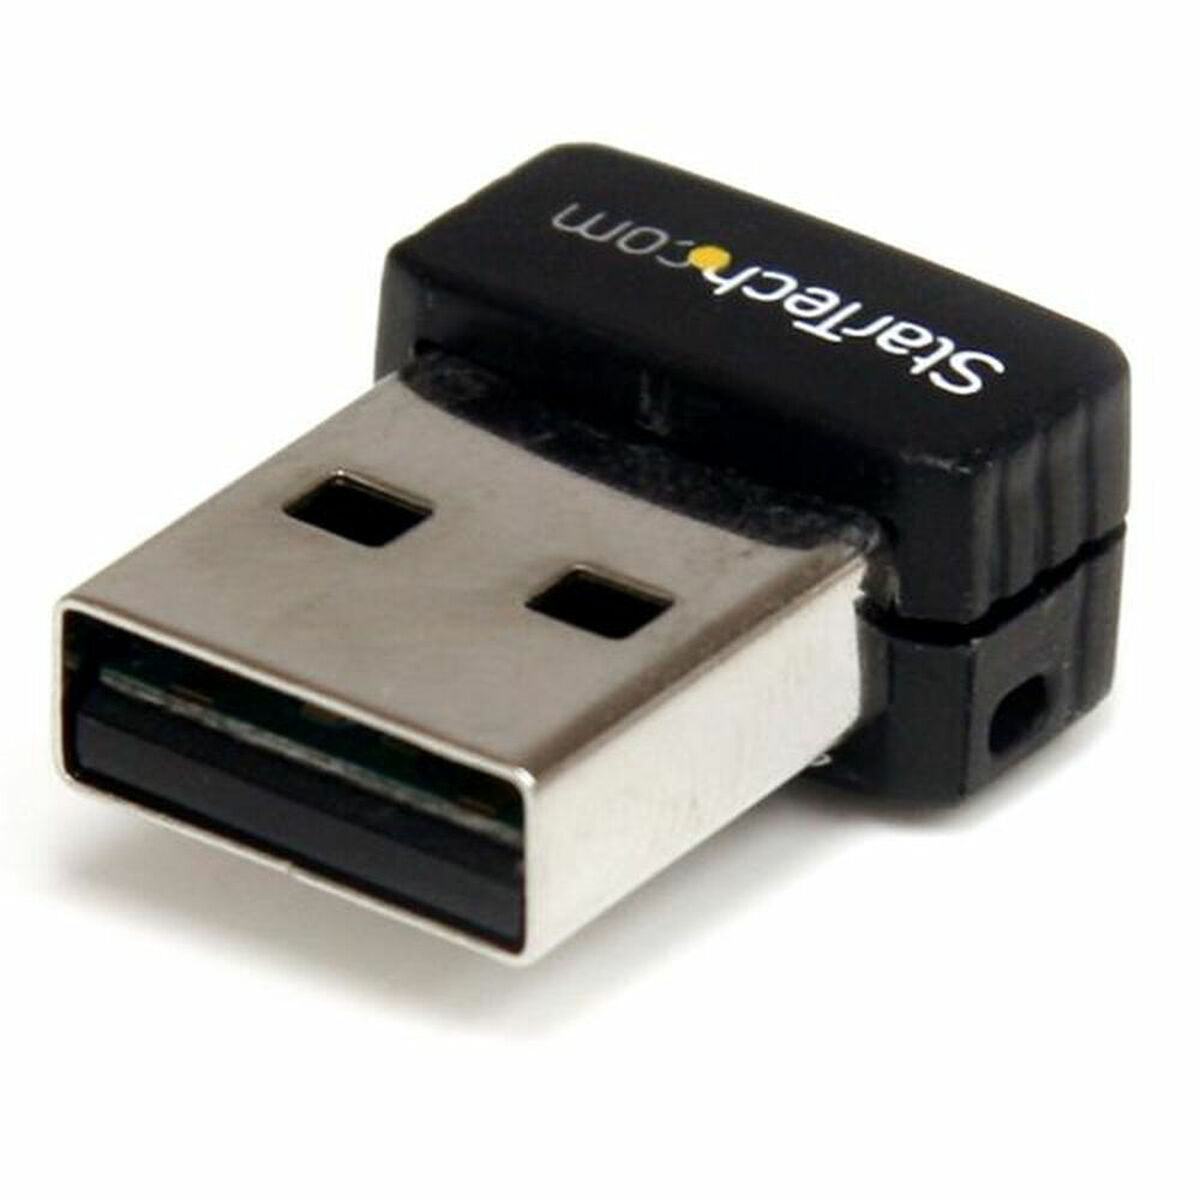 Wi-Fi USB Adapter Startech USB150WN1X1, Startech, Computing, Components, wi-fi-usb-adapter-startech-usb150wn1x1, Brand_Startech, category-reference-2609, category-reference-2803, category-reference-2811, category-reference-t-19685, category-reference-t-19912, category-reference-t-21360, computers / components, Condition_NEW, Price_20 - 50, Teleworking, RiotNook